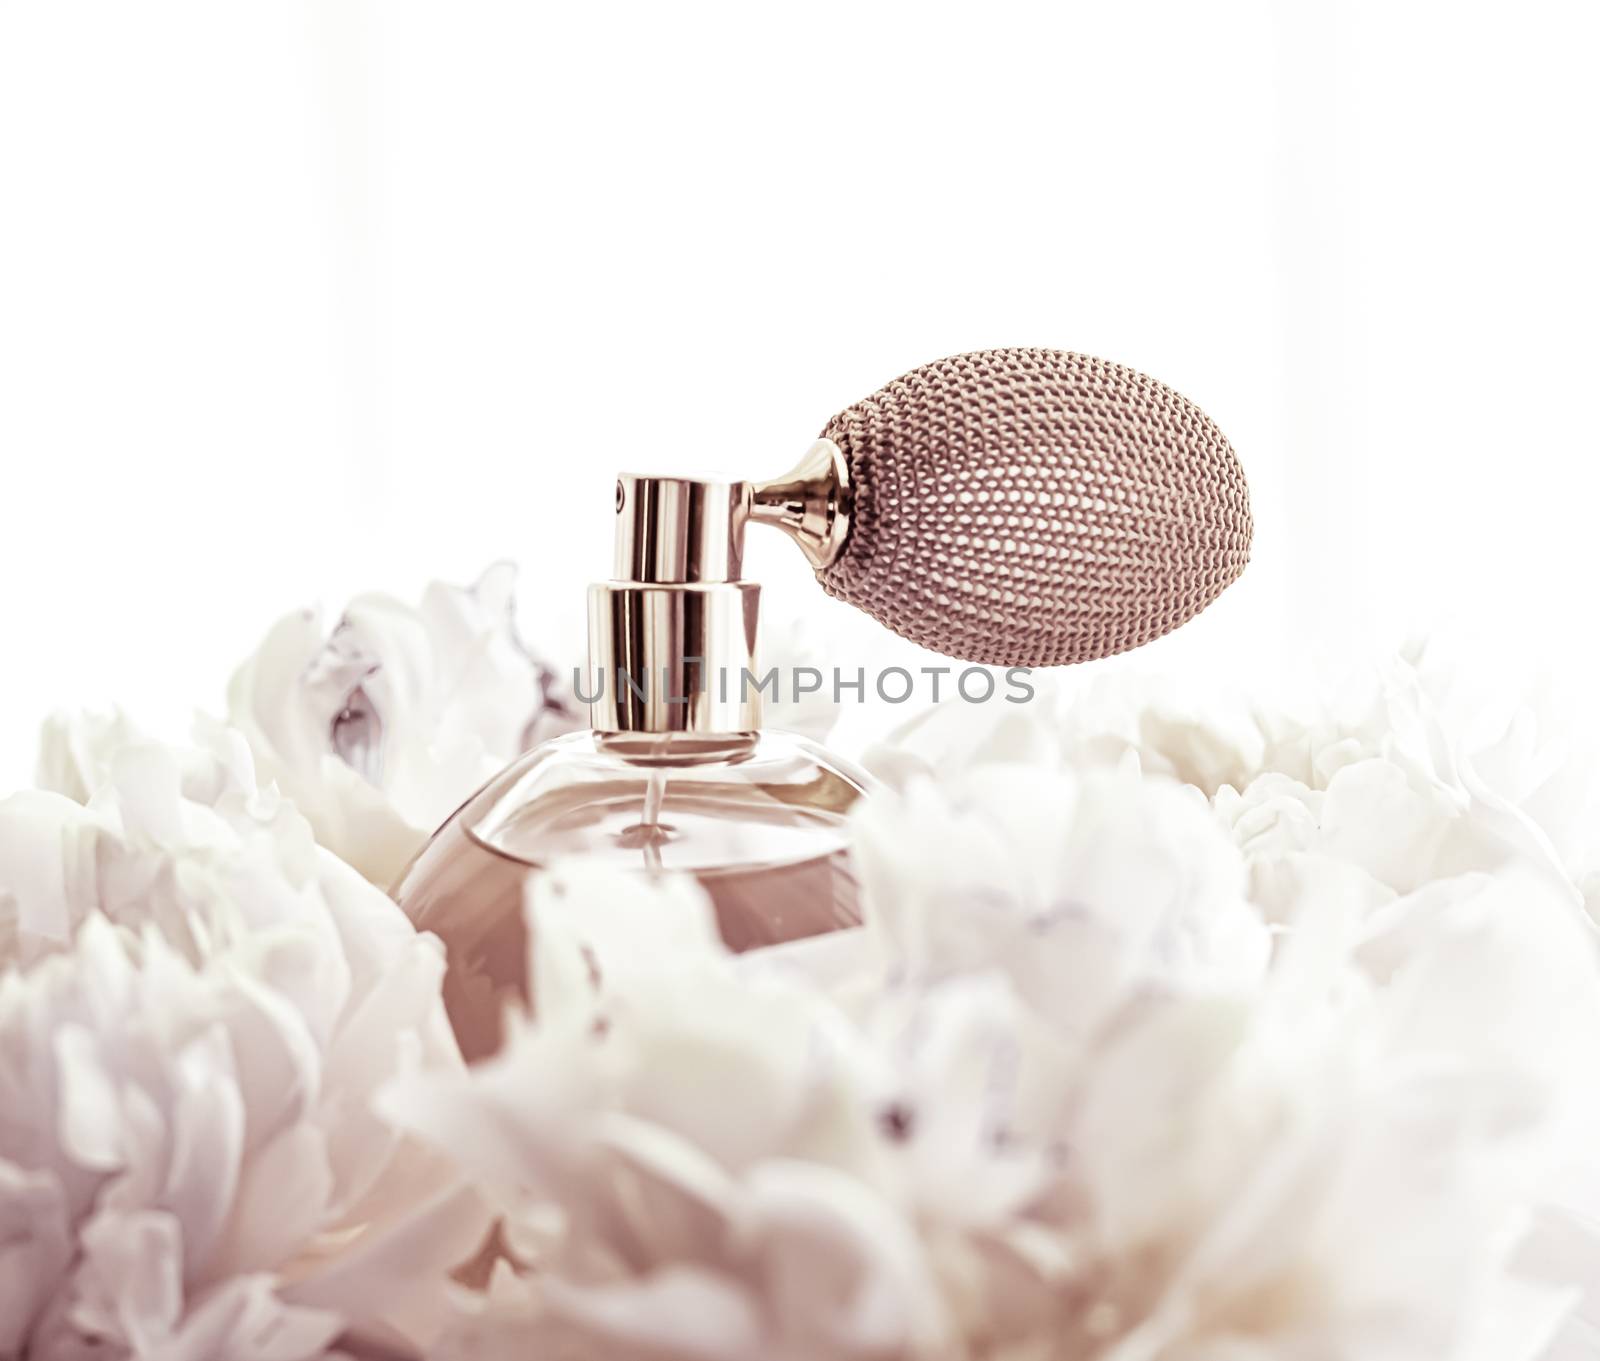 Retro fragrance bottle as luxury perfume product on background of peony flowers, parfum ad and beauty branding design